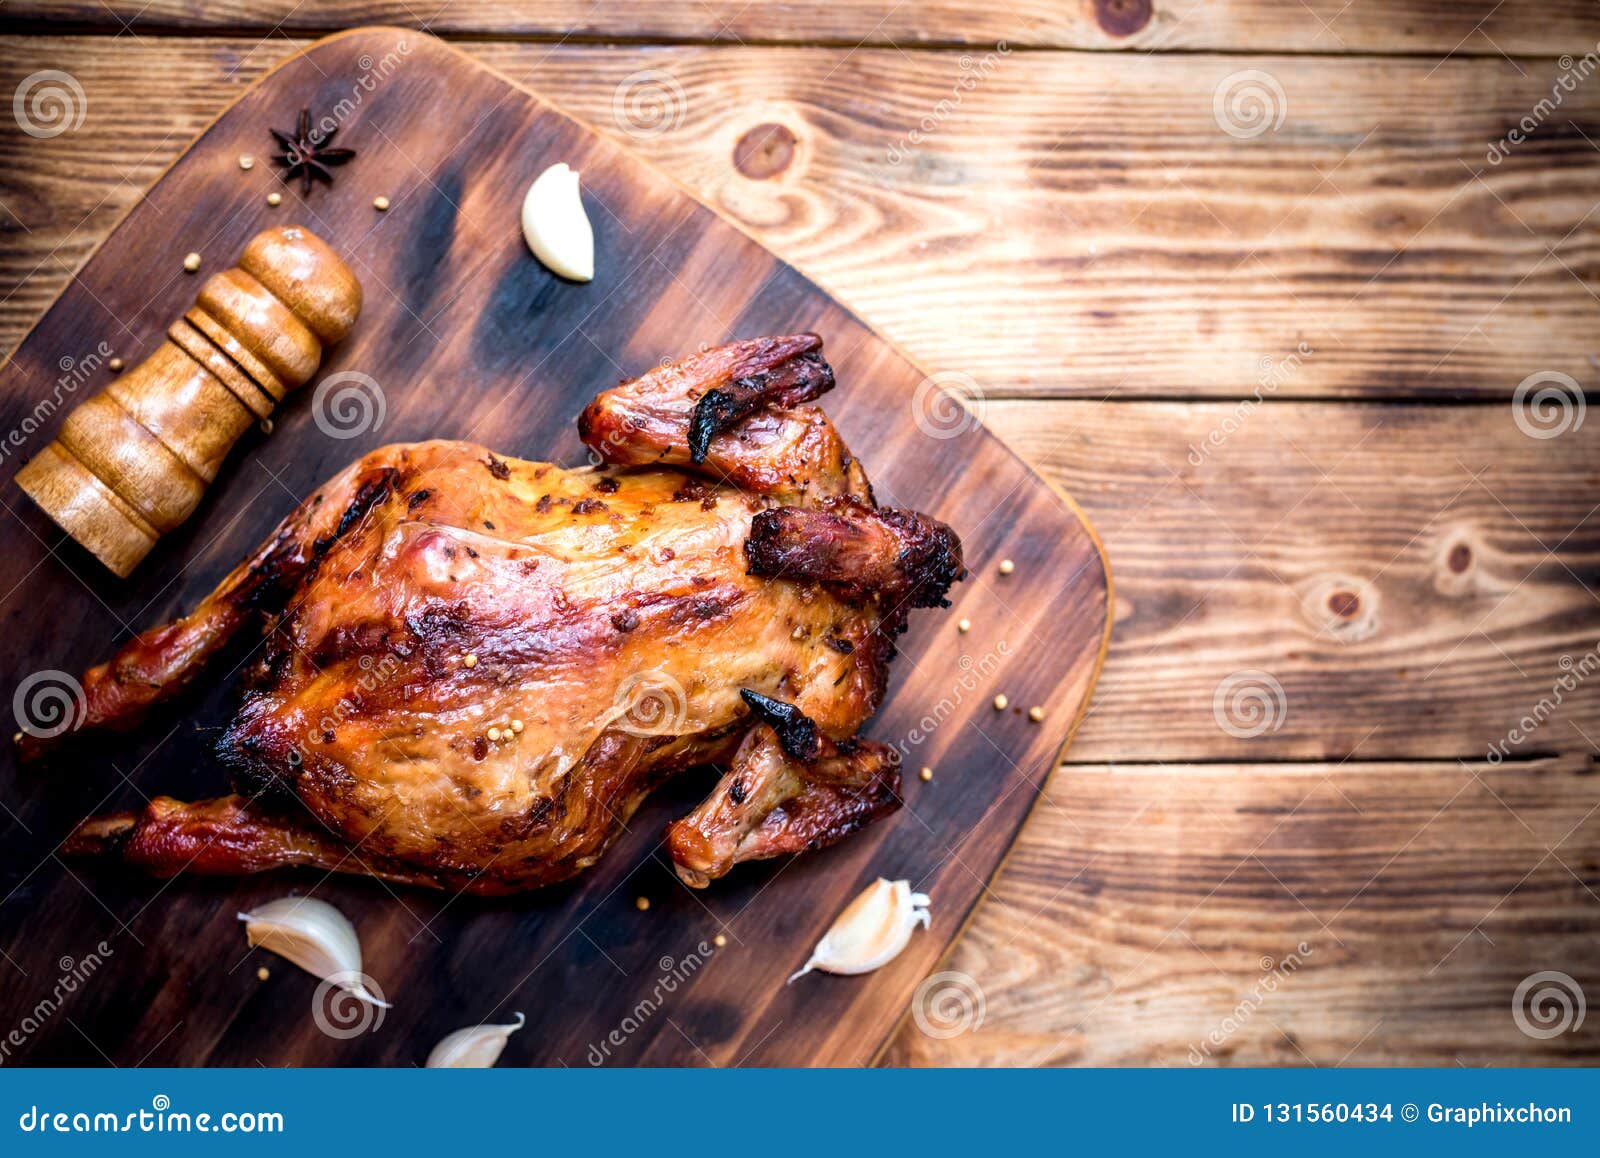 Happy Thanksgiving Day. Roasted Chicken and Turkey Stock Photo - Image ...